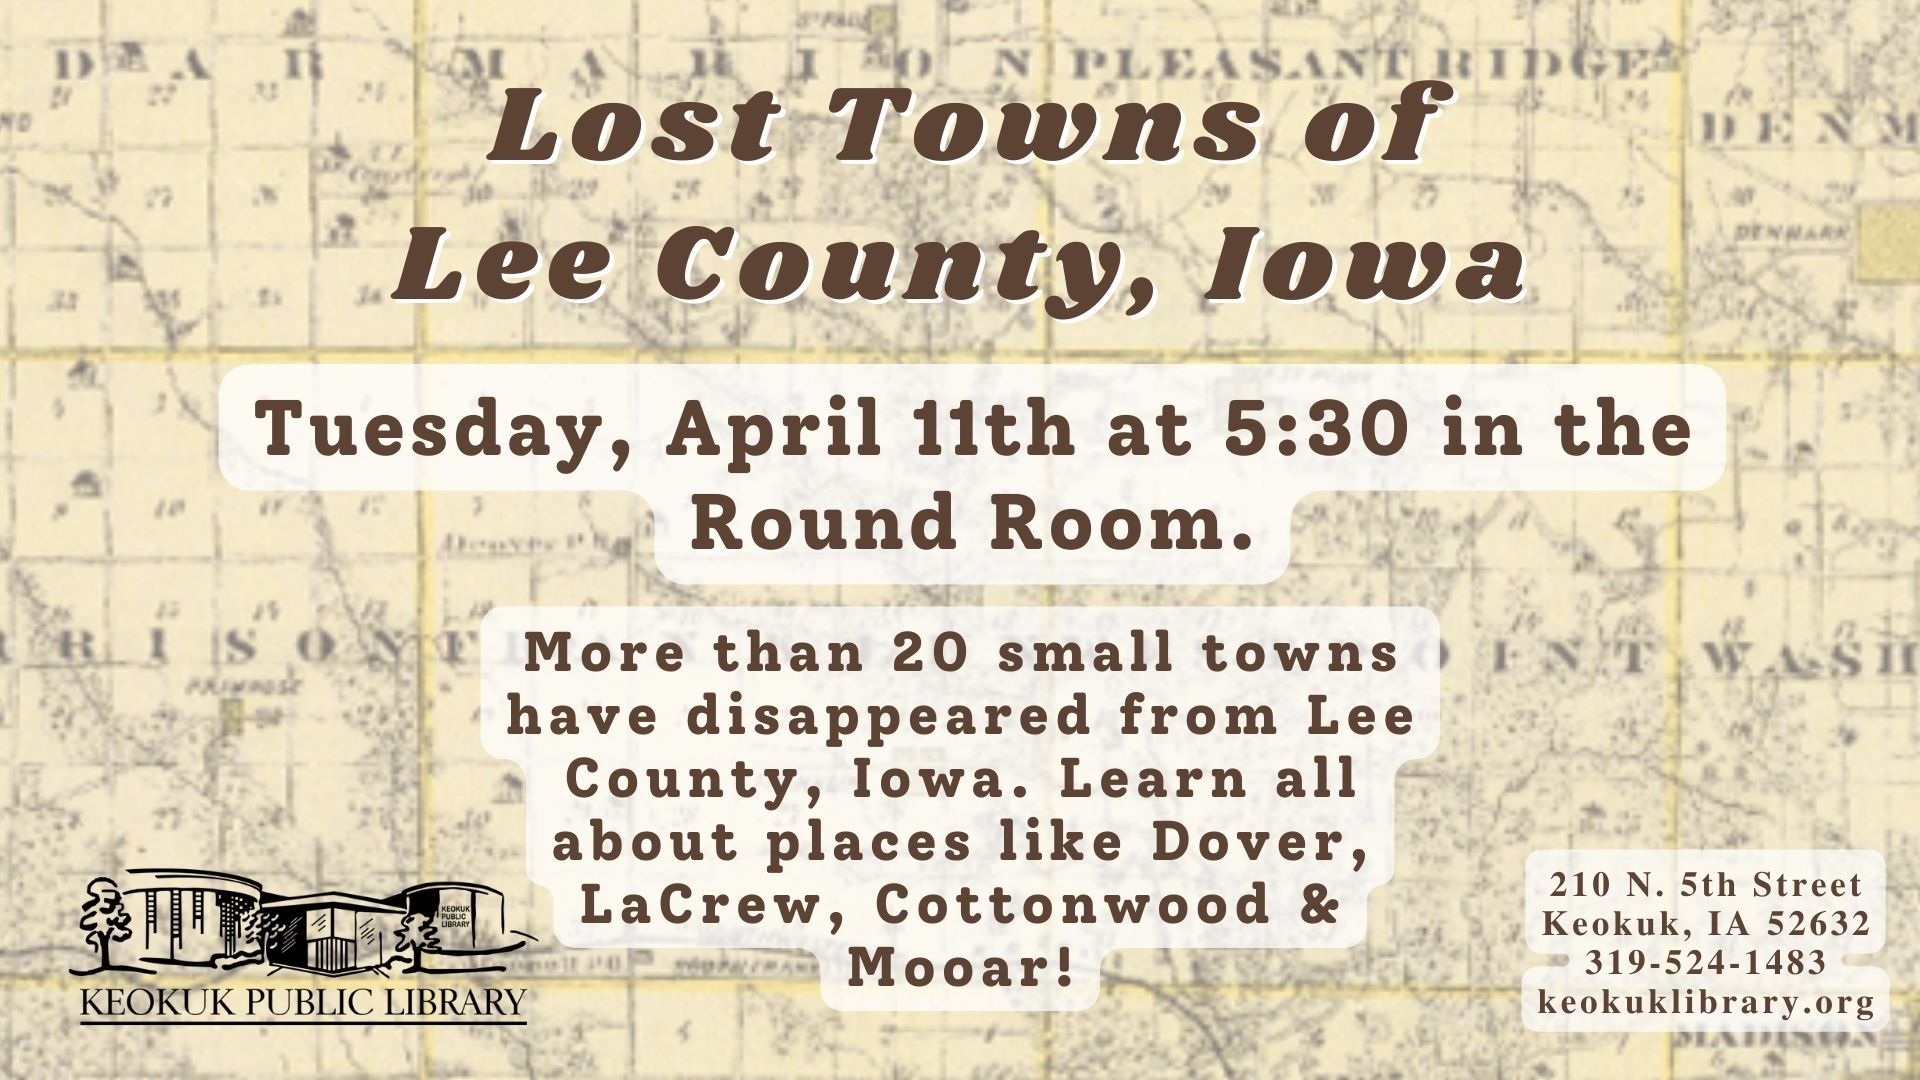 Keokuk Events - Lost Towns of Lee County, Iowa